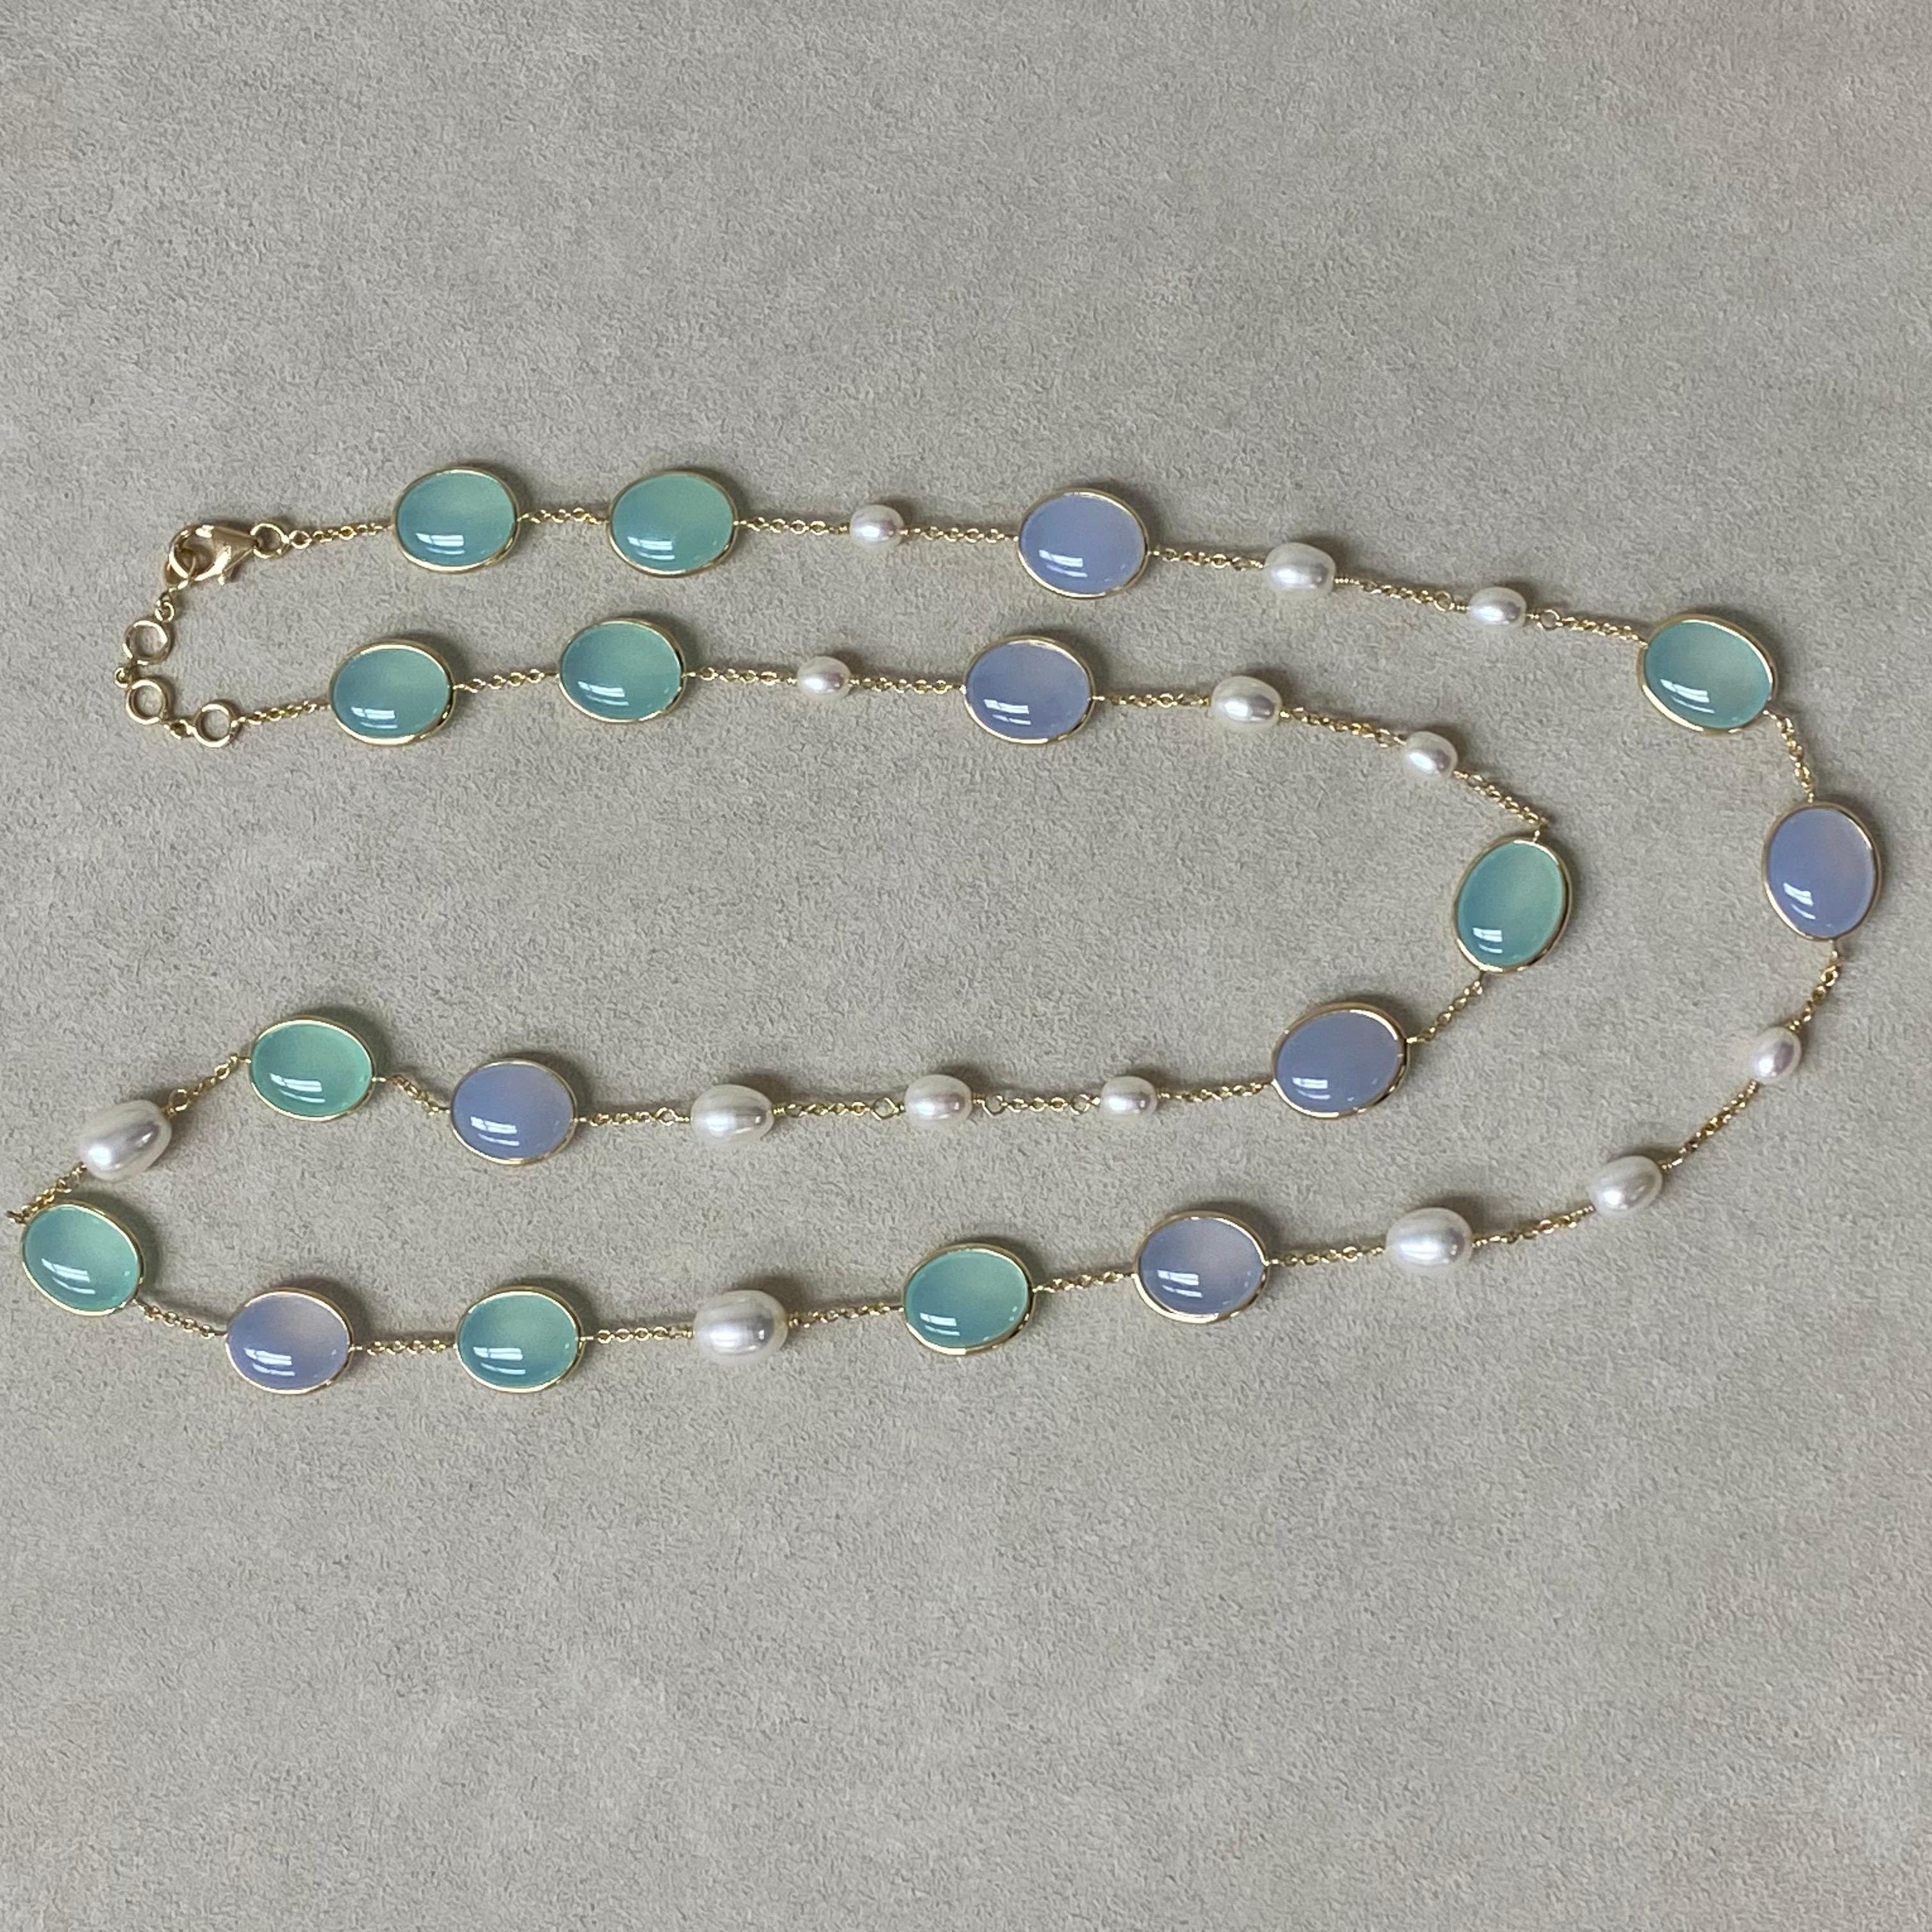 Women's Syna Yellow Gold Necklace with Pearls, Blue Chalcedony and Sea Green Chalcedony